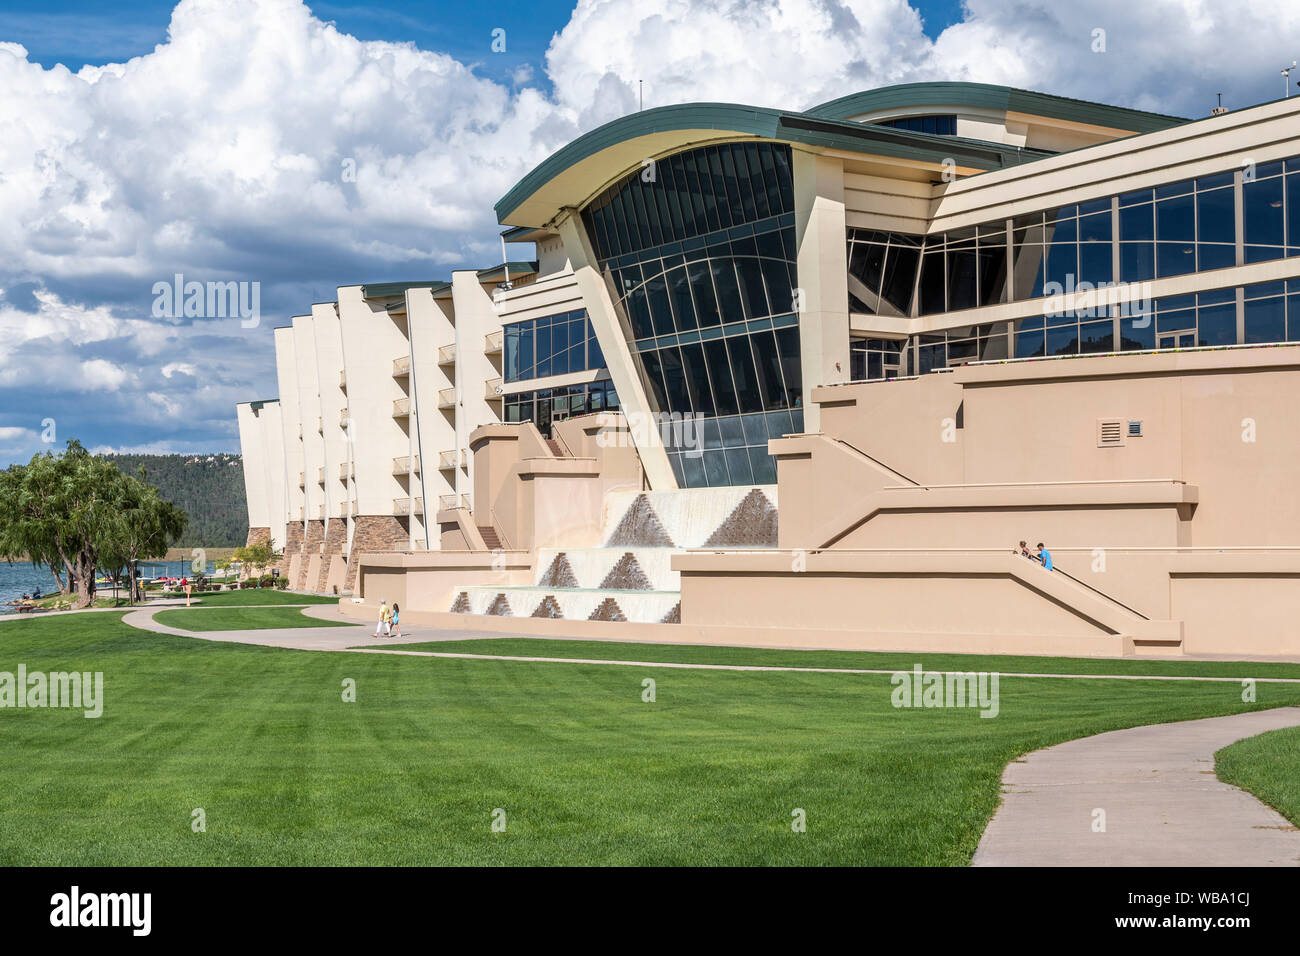 Indian casino, Inn of the Mountain Gods Resort and Casino, Mescalero Apache Indian Reservation, New Mexico, USA. Stock Photo